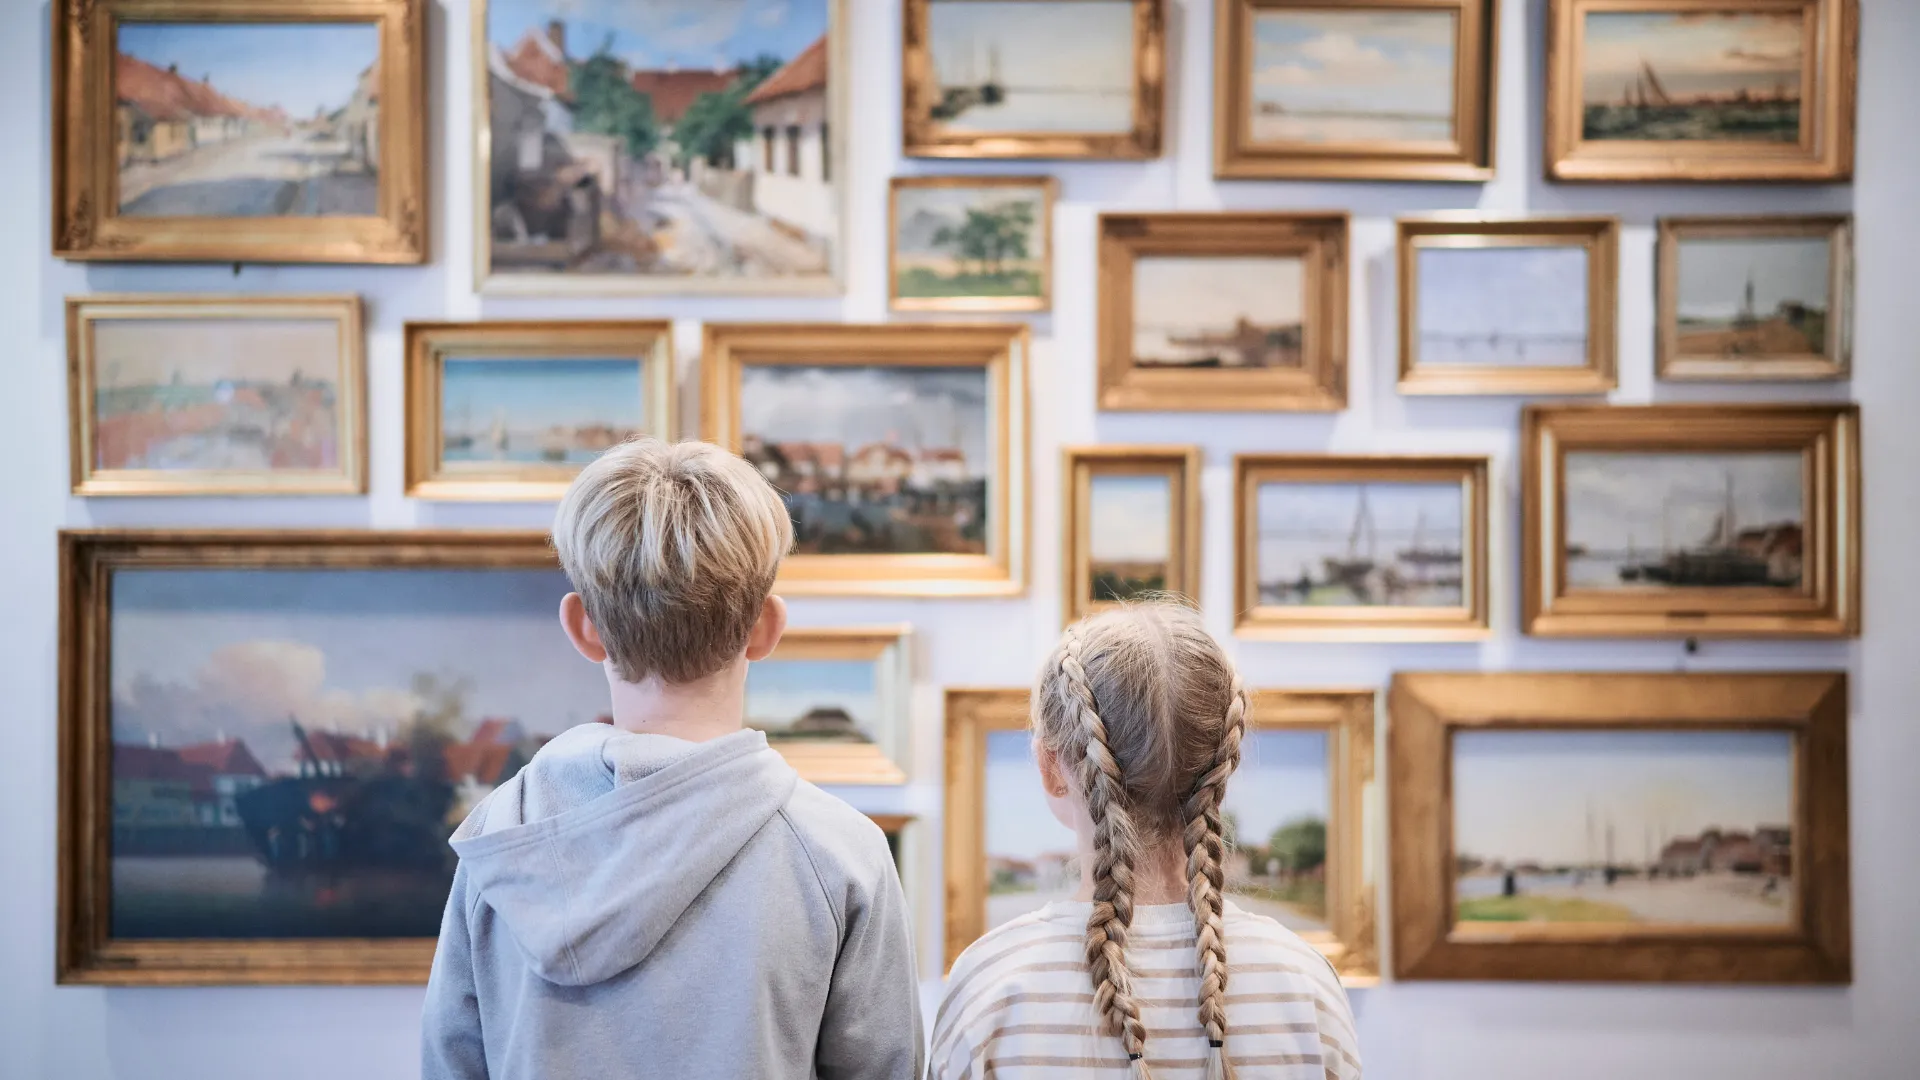 The Johannes Larsen Museum offers art for both children and adults